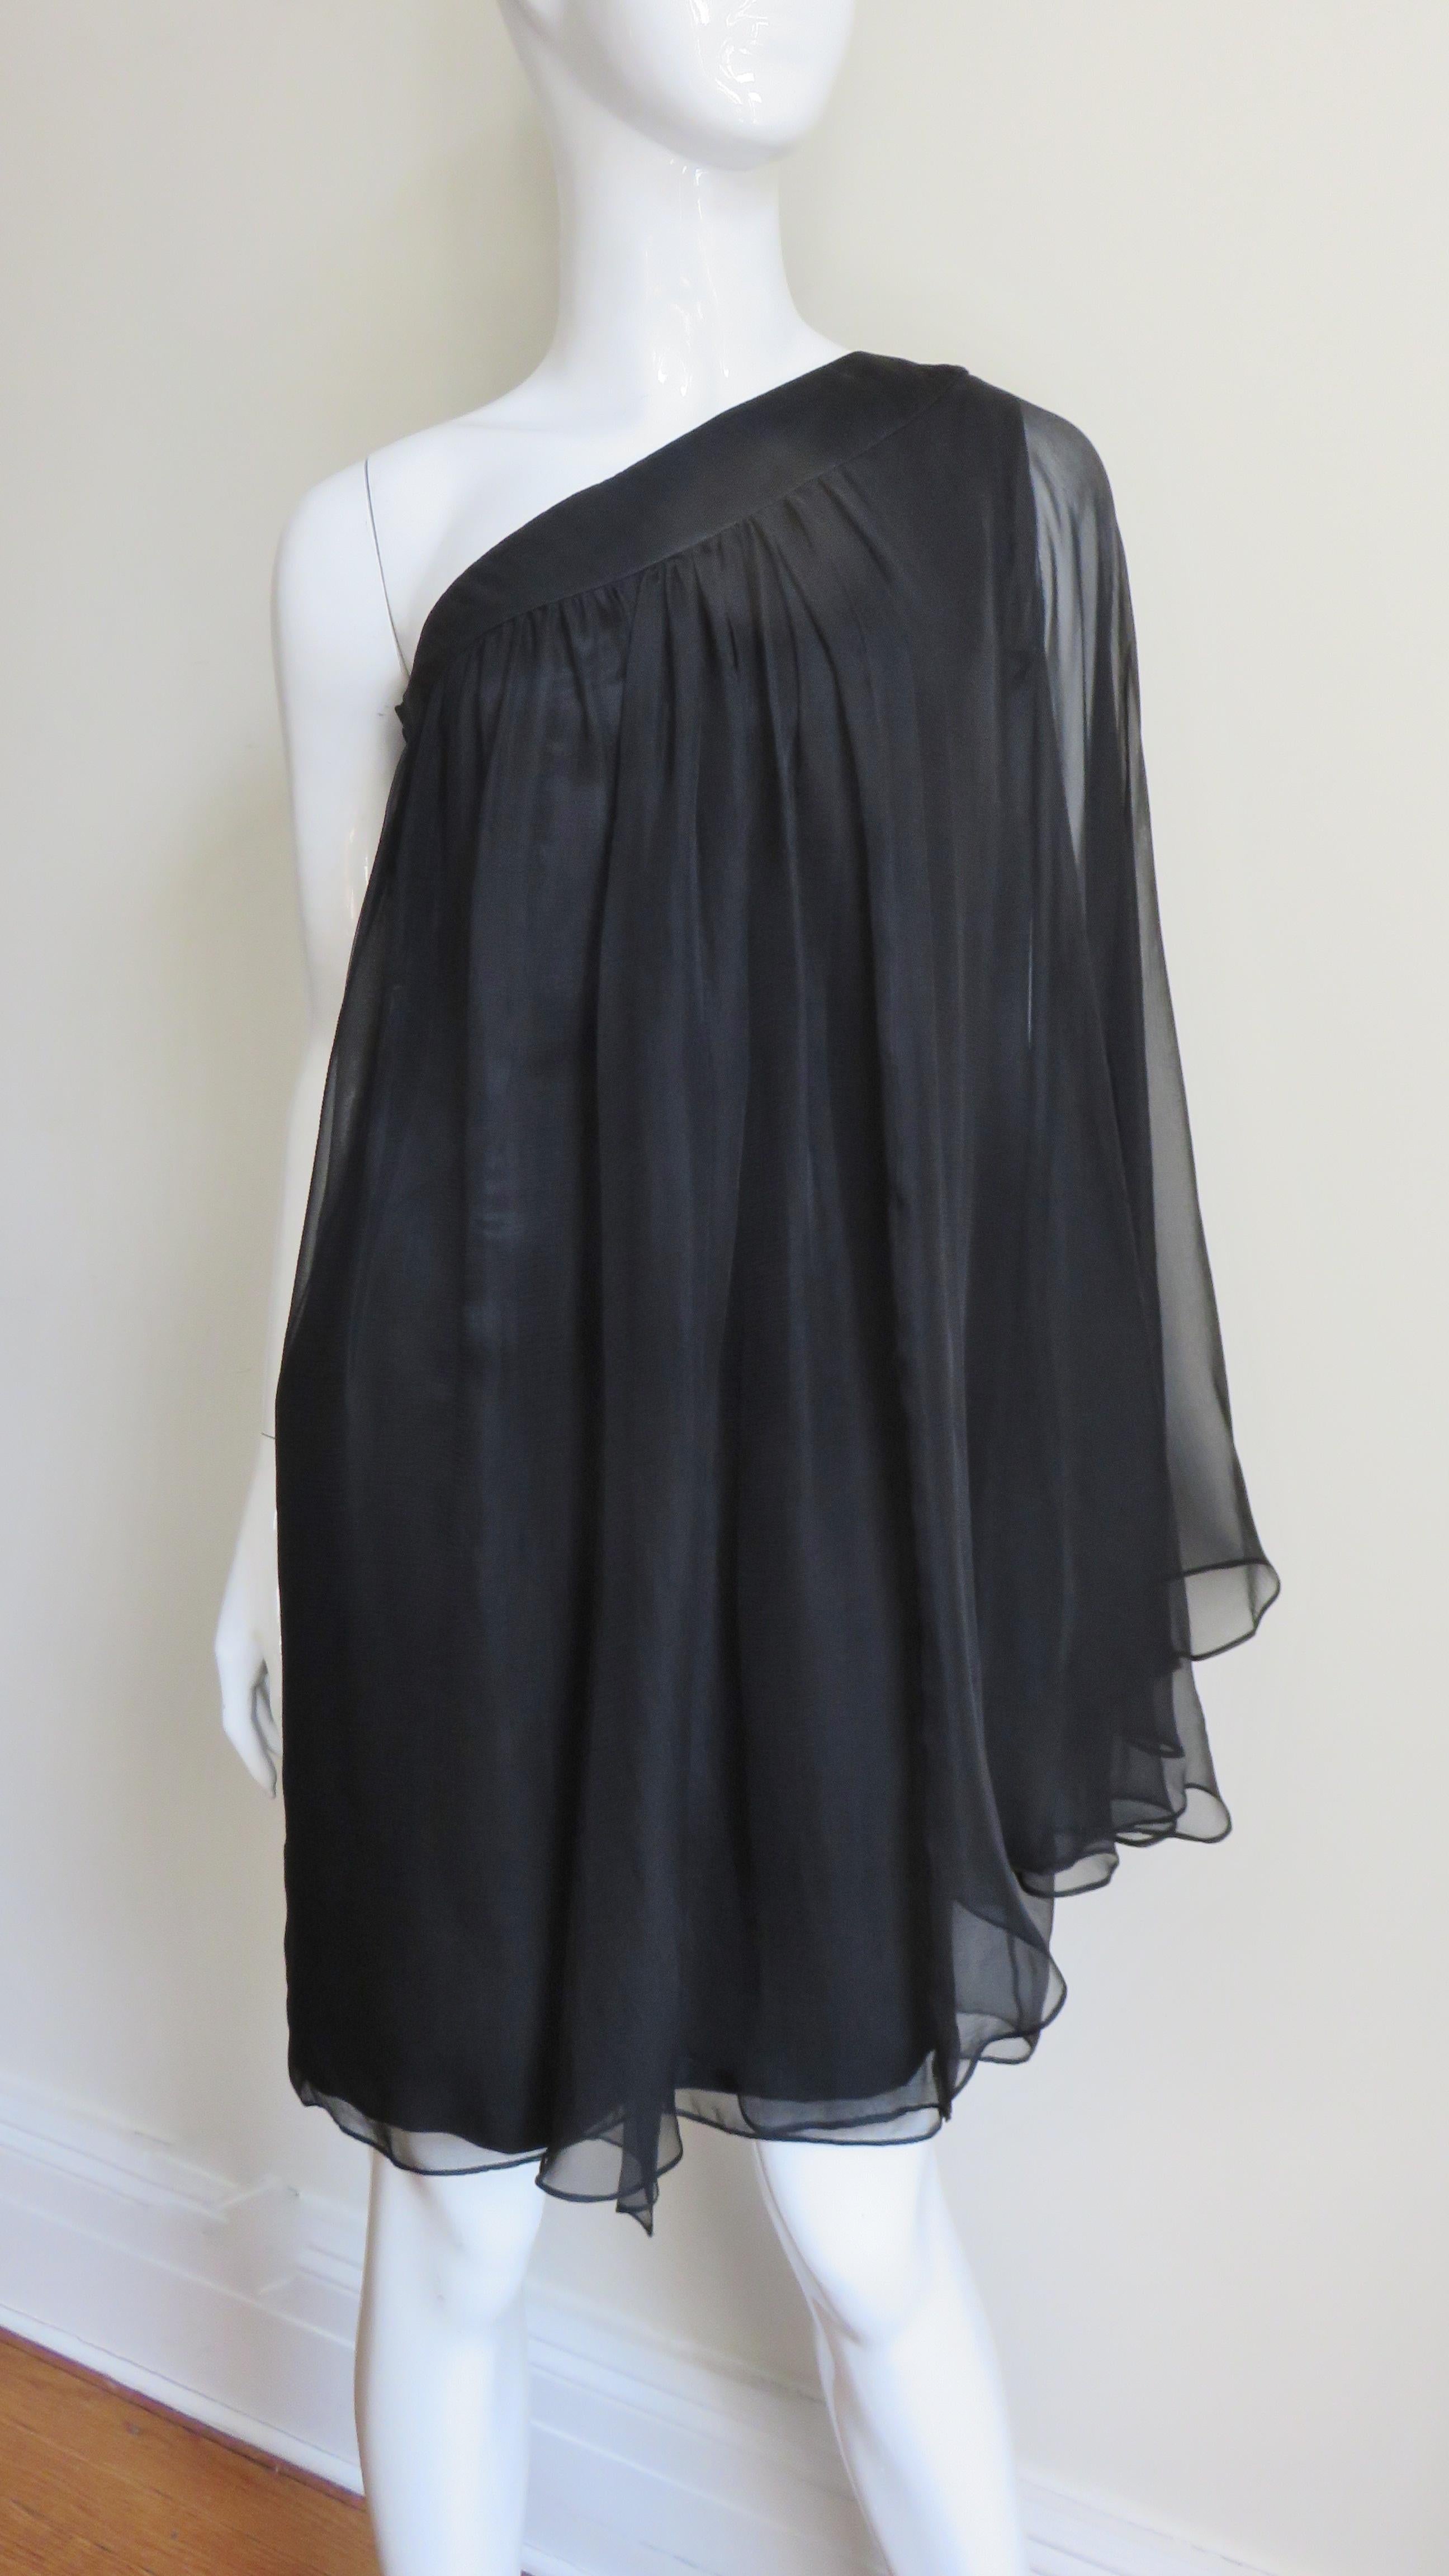 A beautiful and ethereal one shoulder dress from Christian Dior of layers of sheer black silk. Two panels of softly gathered folds of silk fall and overlap at the shoulder allowing the arm to peek out or be more exposed. Underneath is an attached